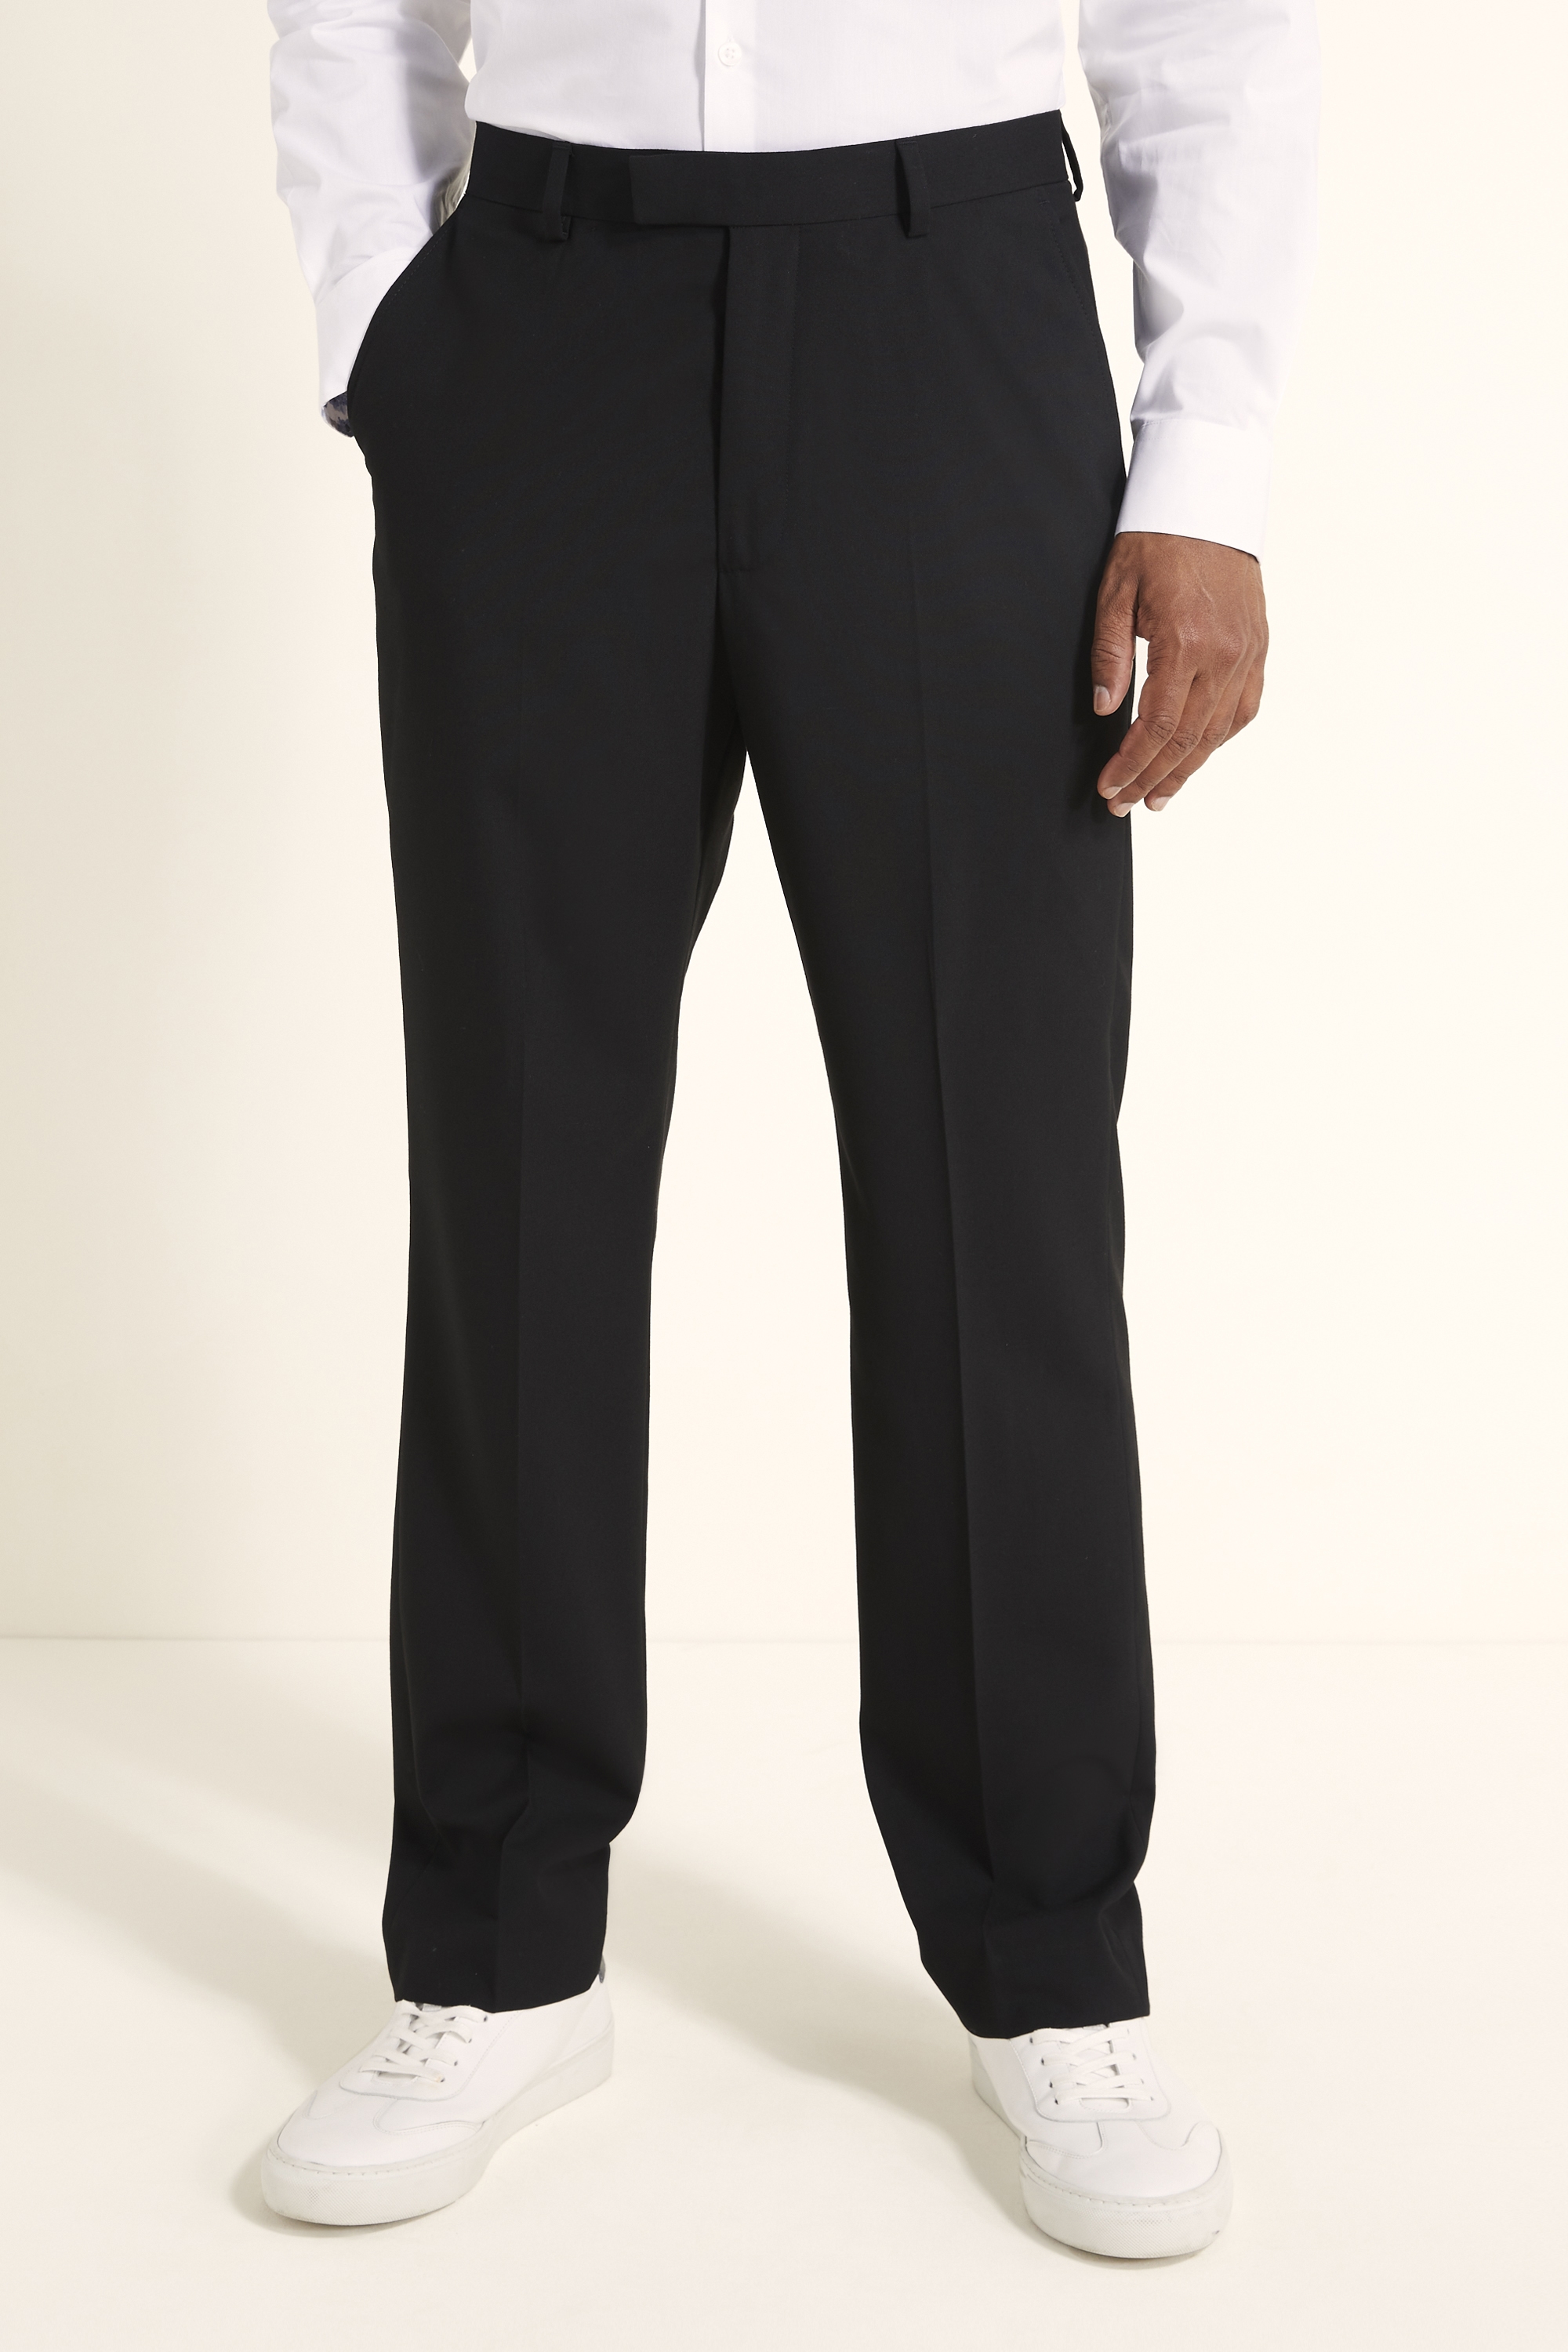 Buy Black Branmarket Classic Fit Wool Blend Trouser was £120.00 now on Sale  for £59.95